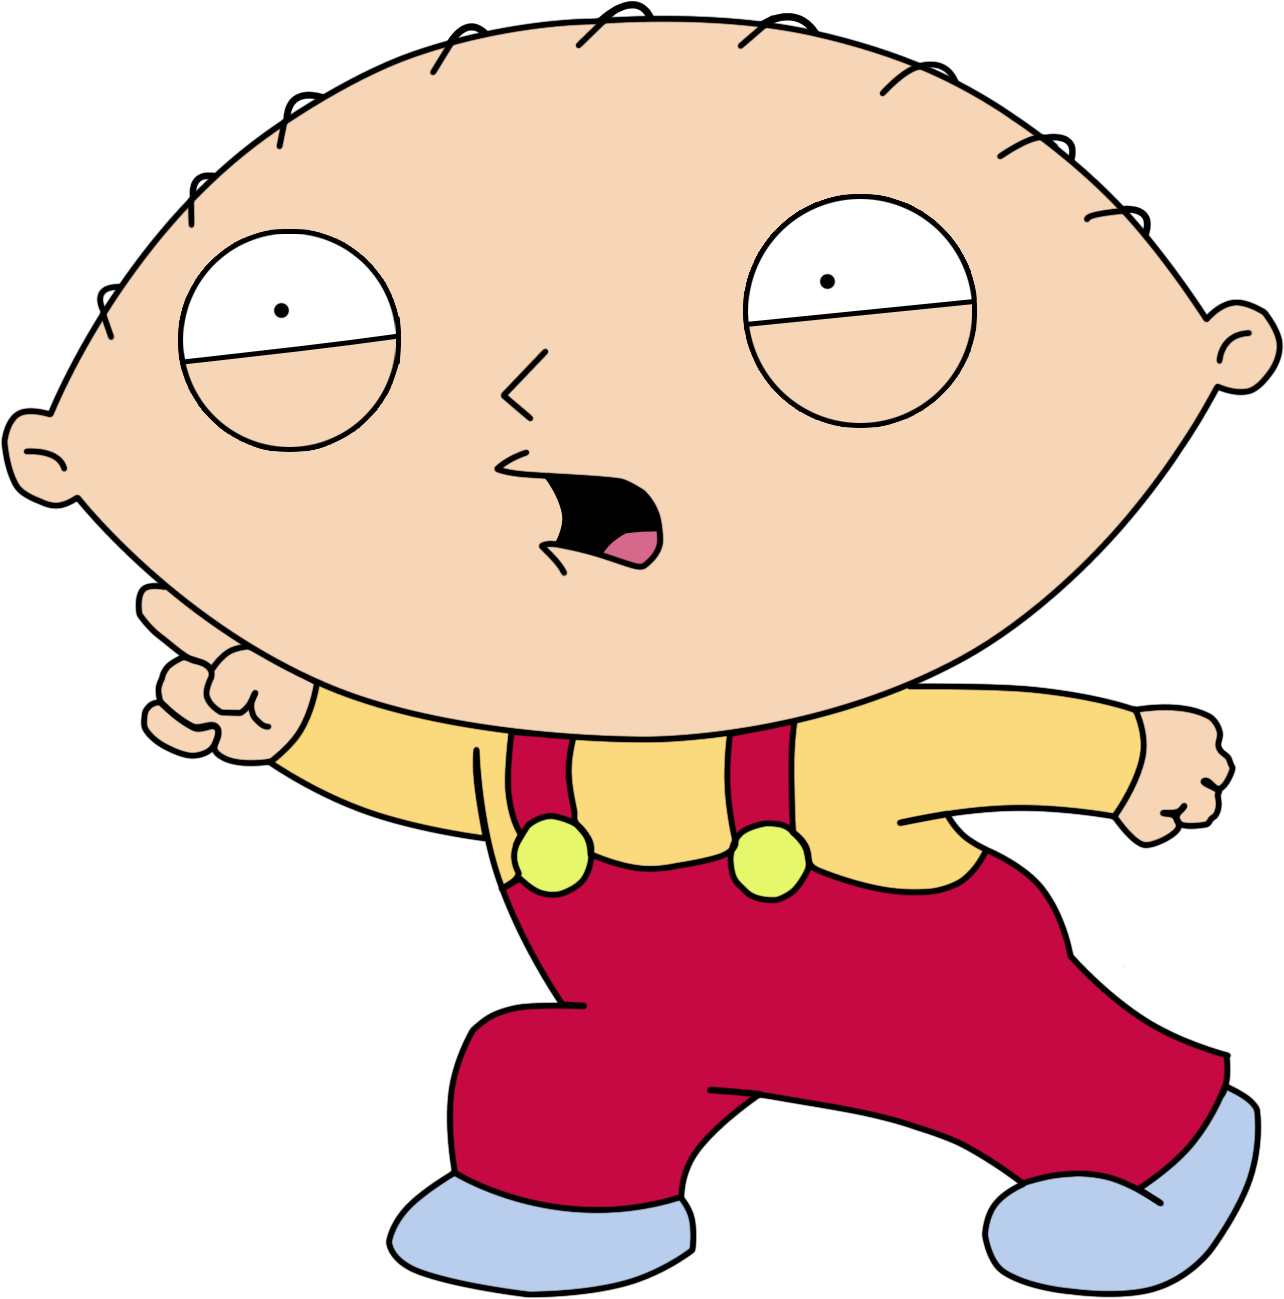 Family Guy Character Stewie Walking